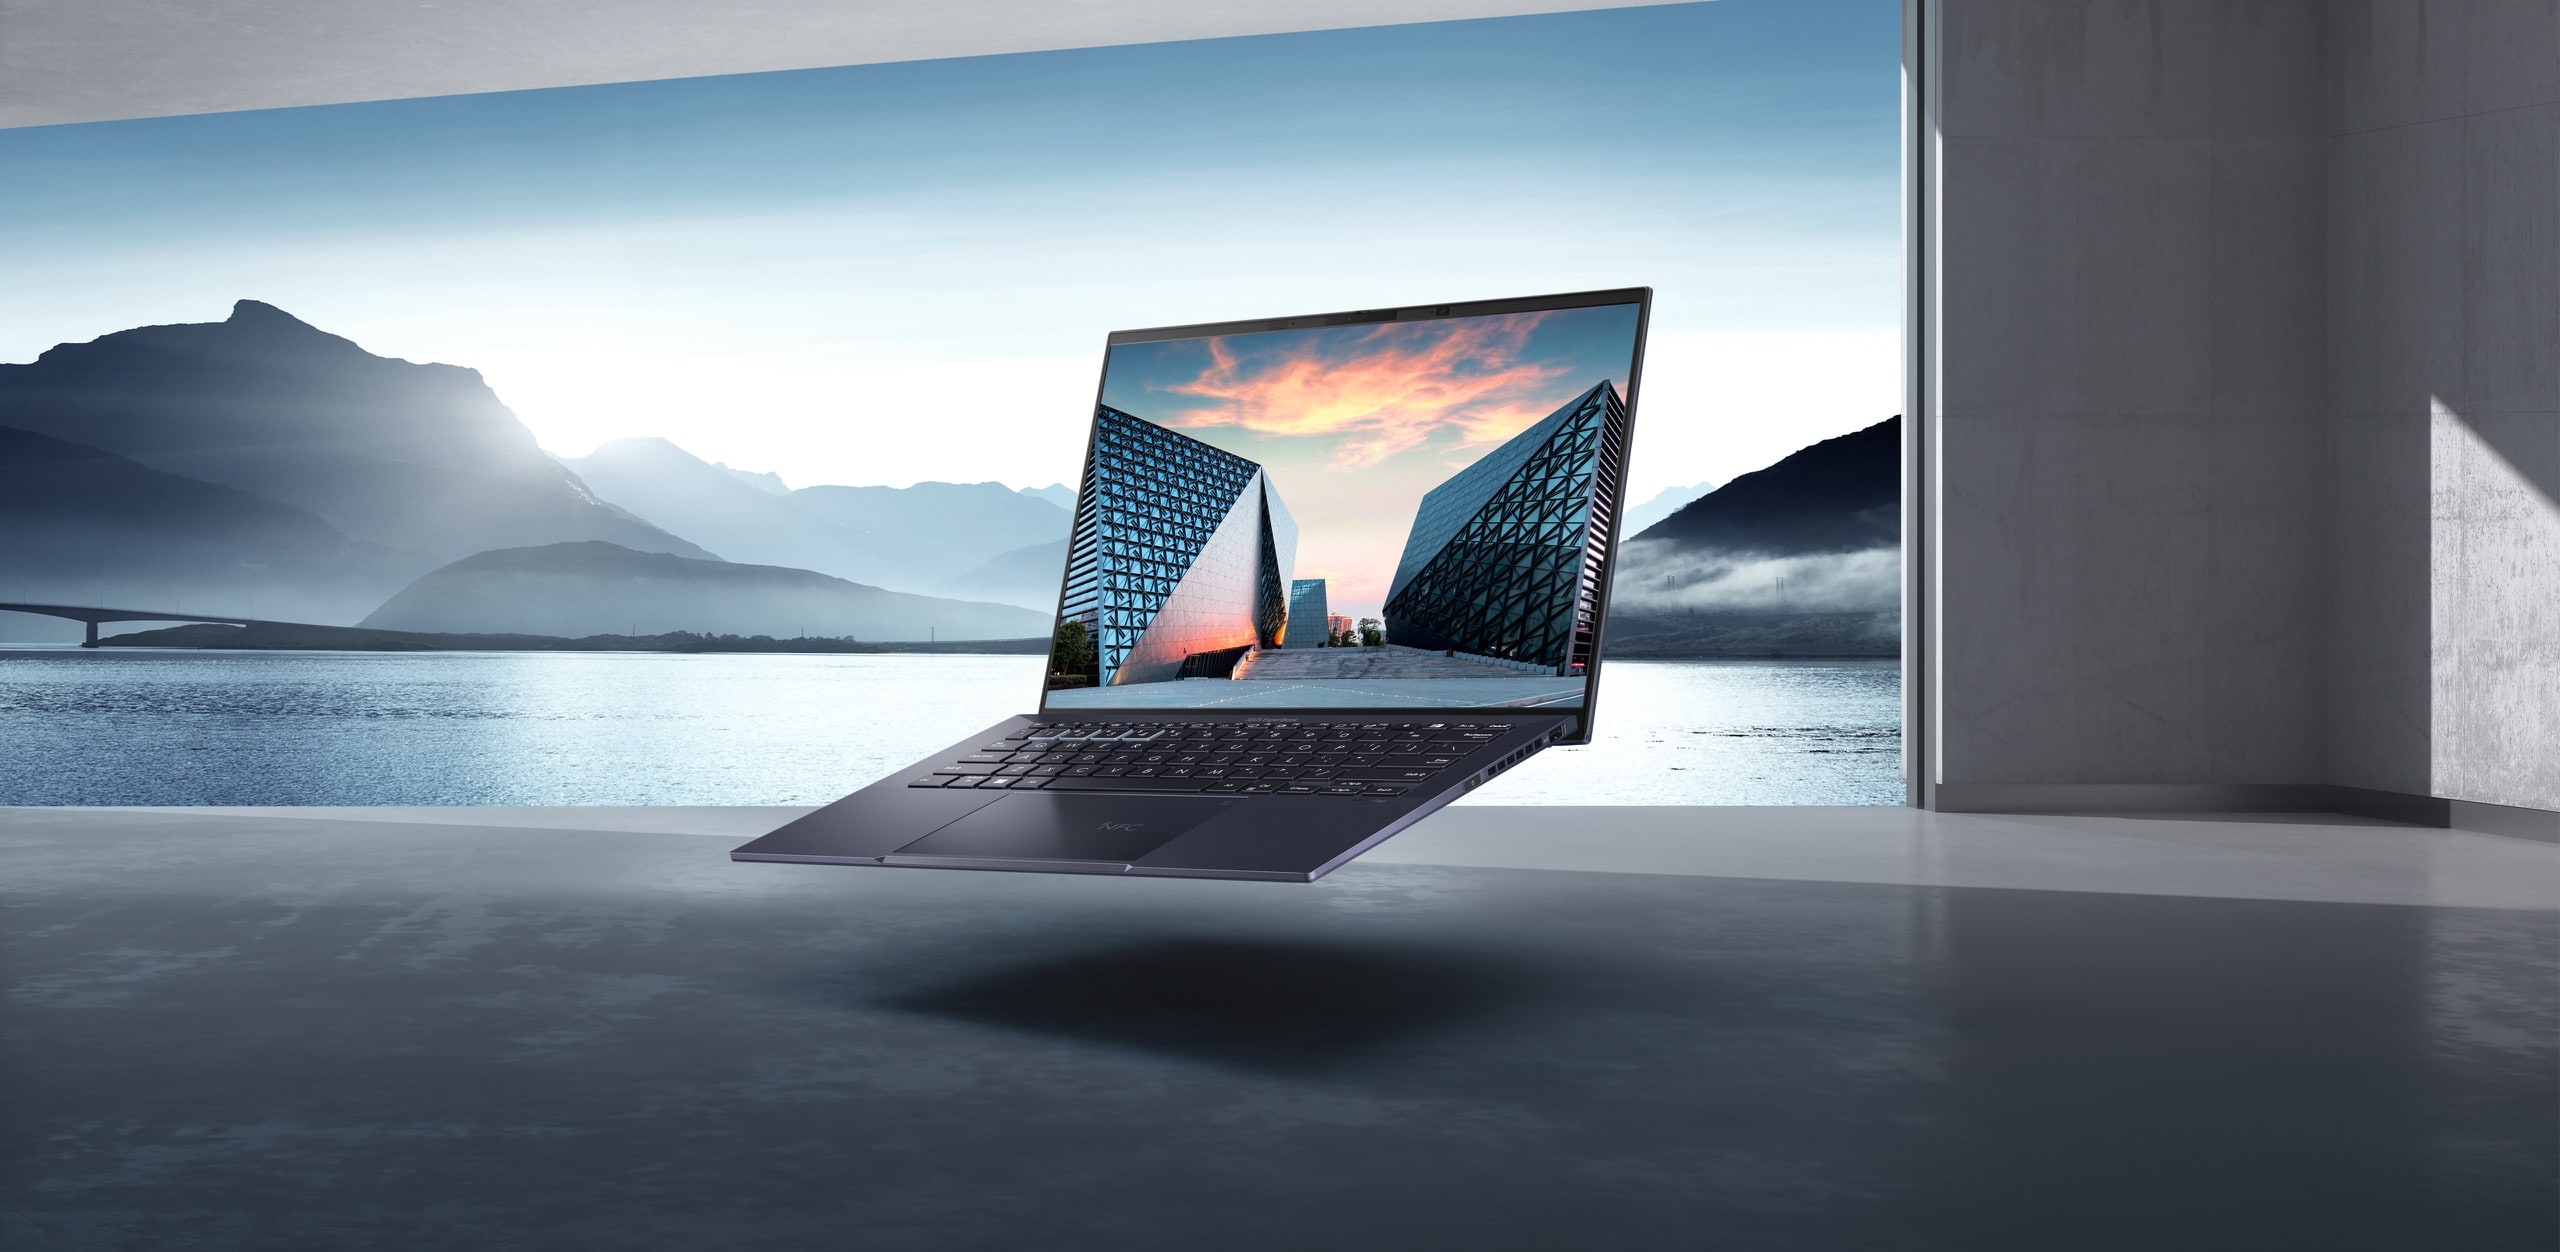 ASUS Announces the all New Enterprise Focussed ExpertBook B9 OLED, B56 OLED and B54 with 13th Gen Intel core processors